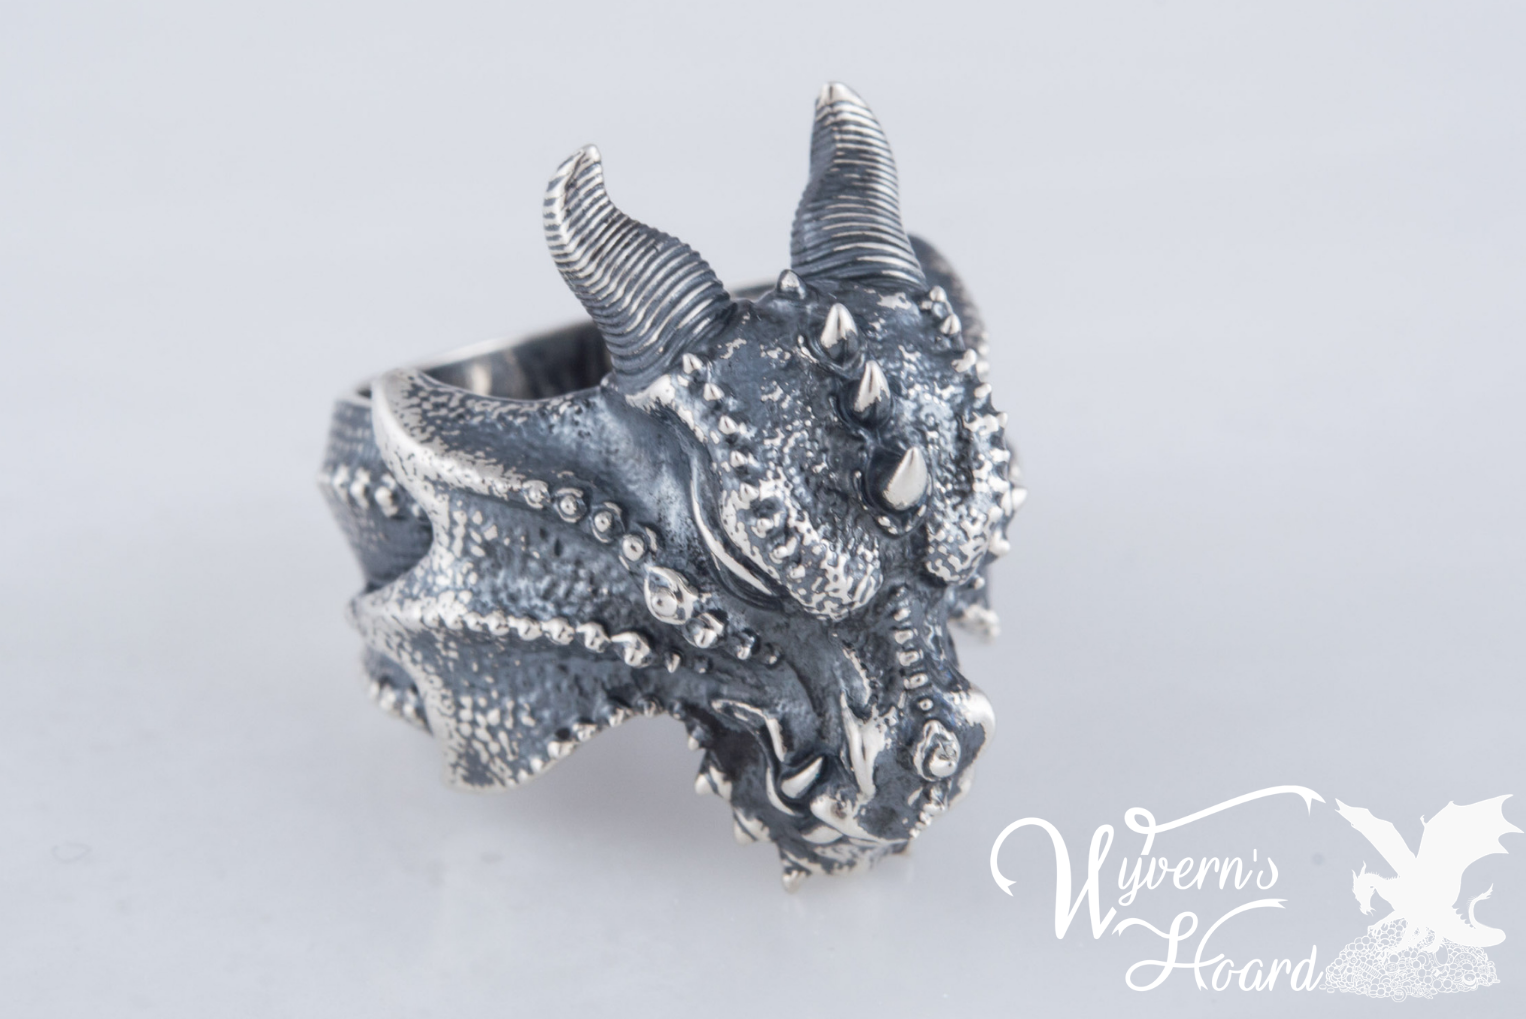 Dragon's Head Sterling Silver Ring